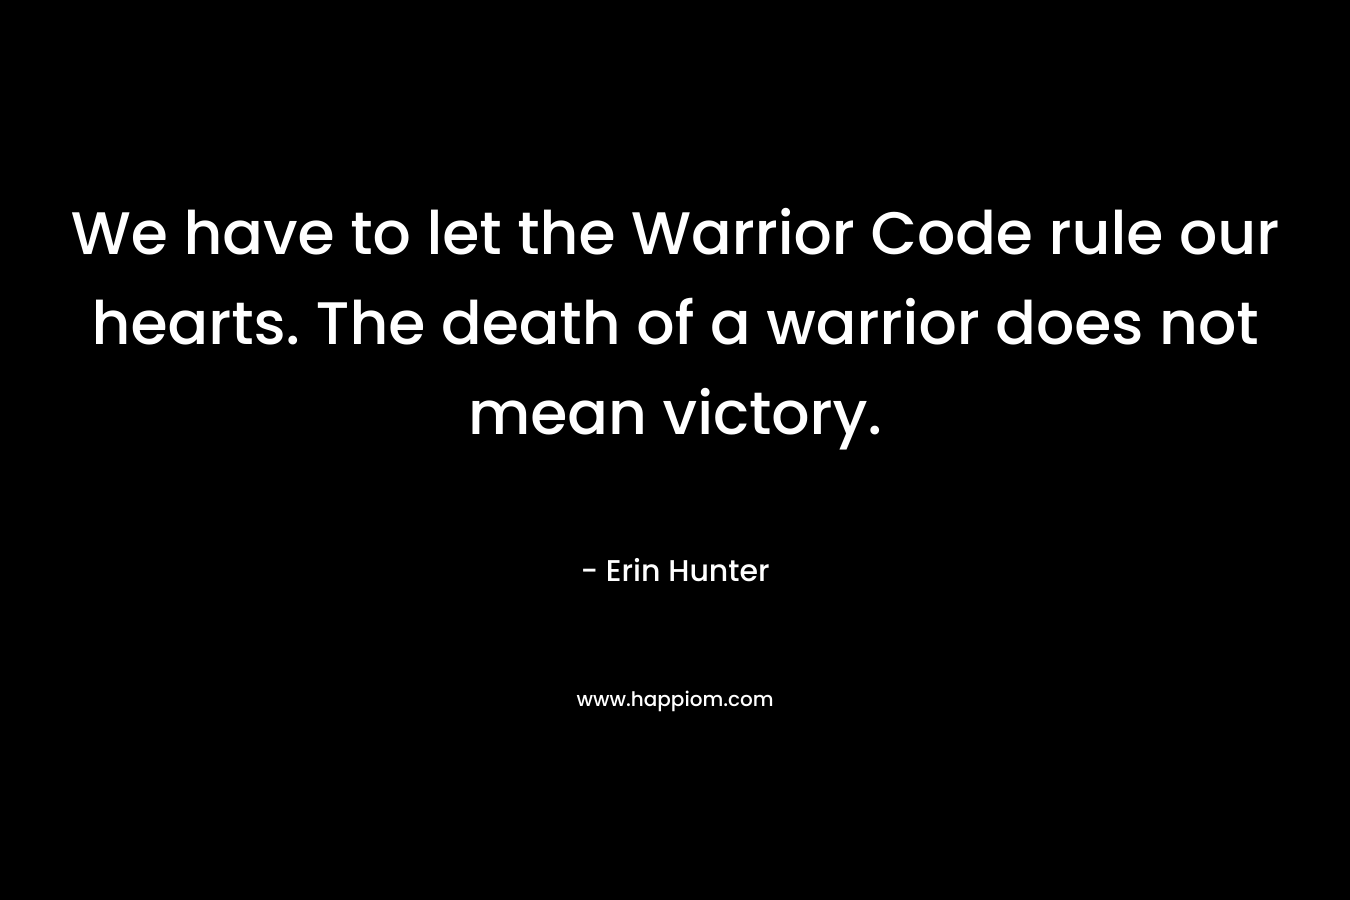 We have to let the Warrior Code rule our hearts. The death of a warrior does not mean victory. – Erin Hunter